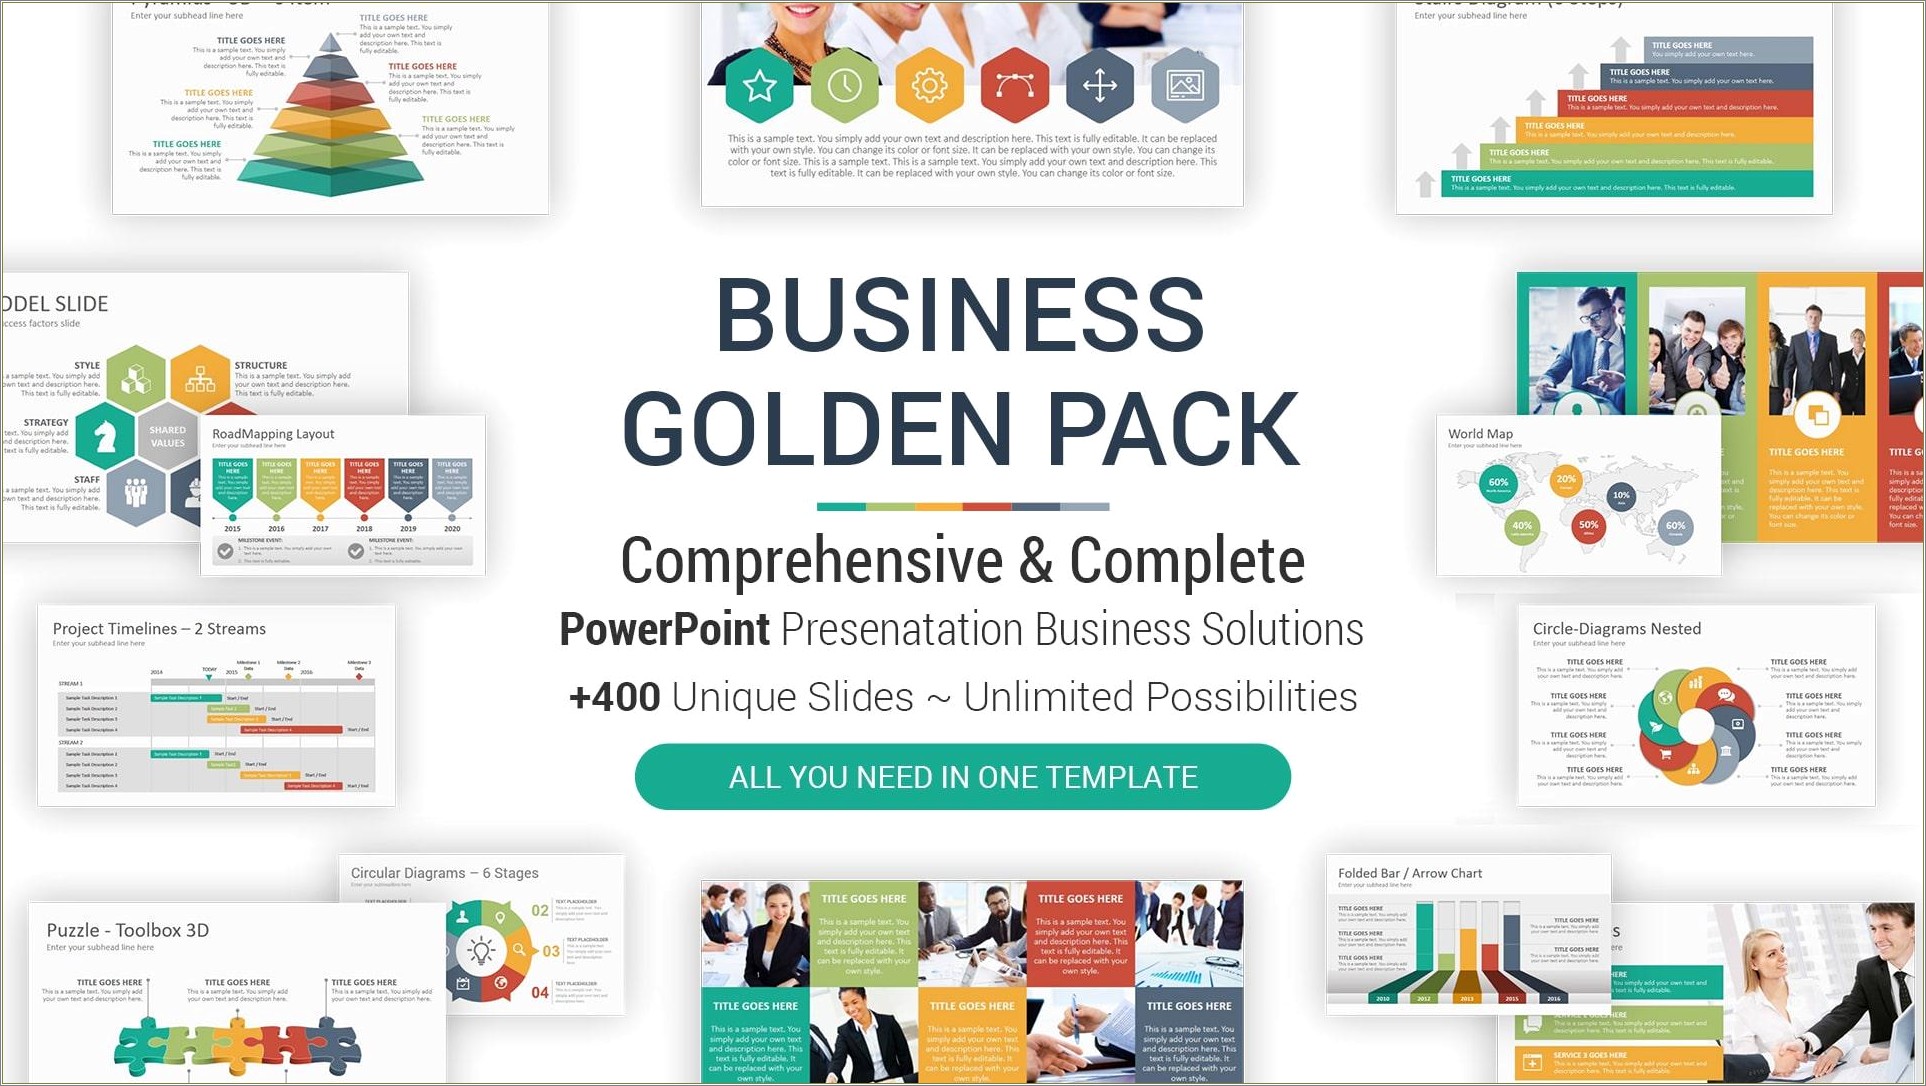 Free Animated Templates For Powerpoint 2013